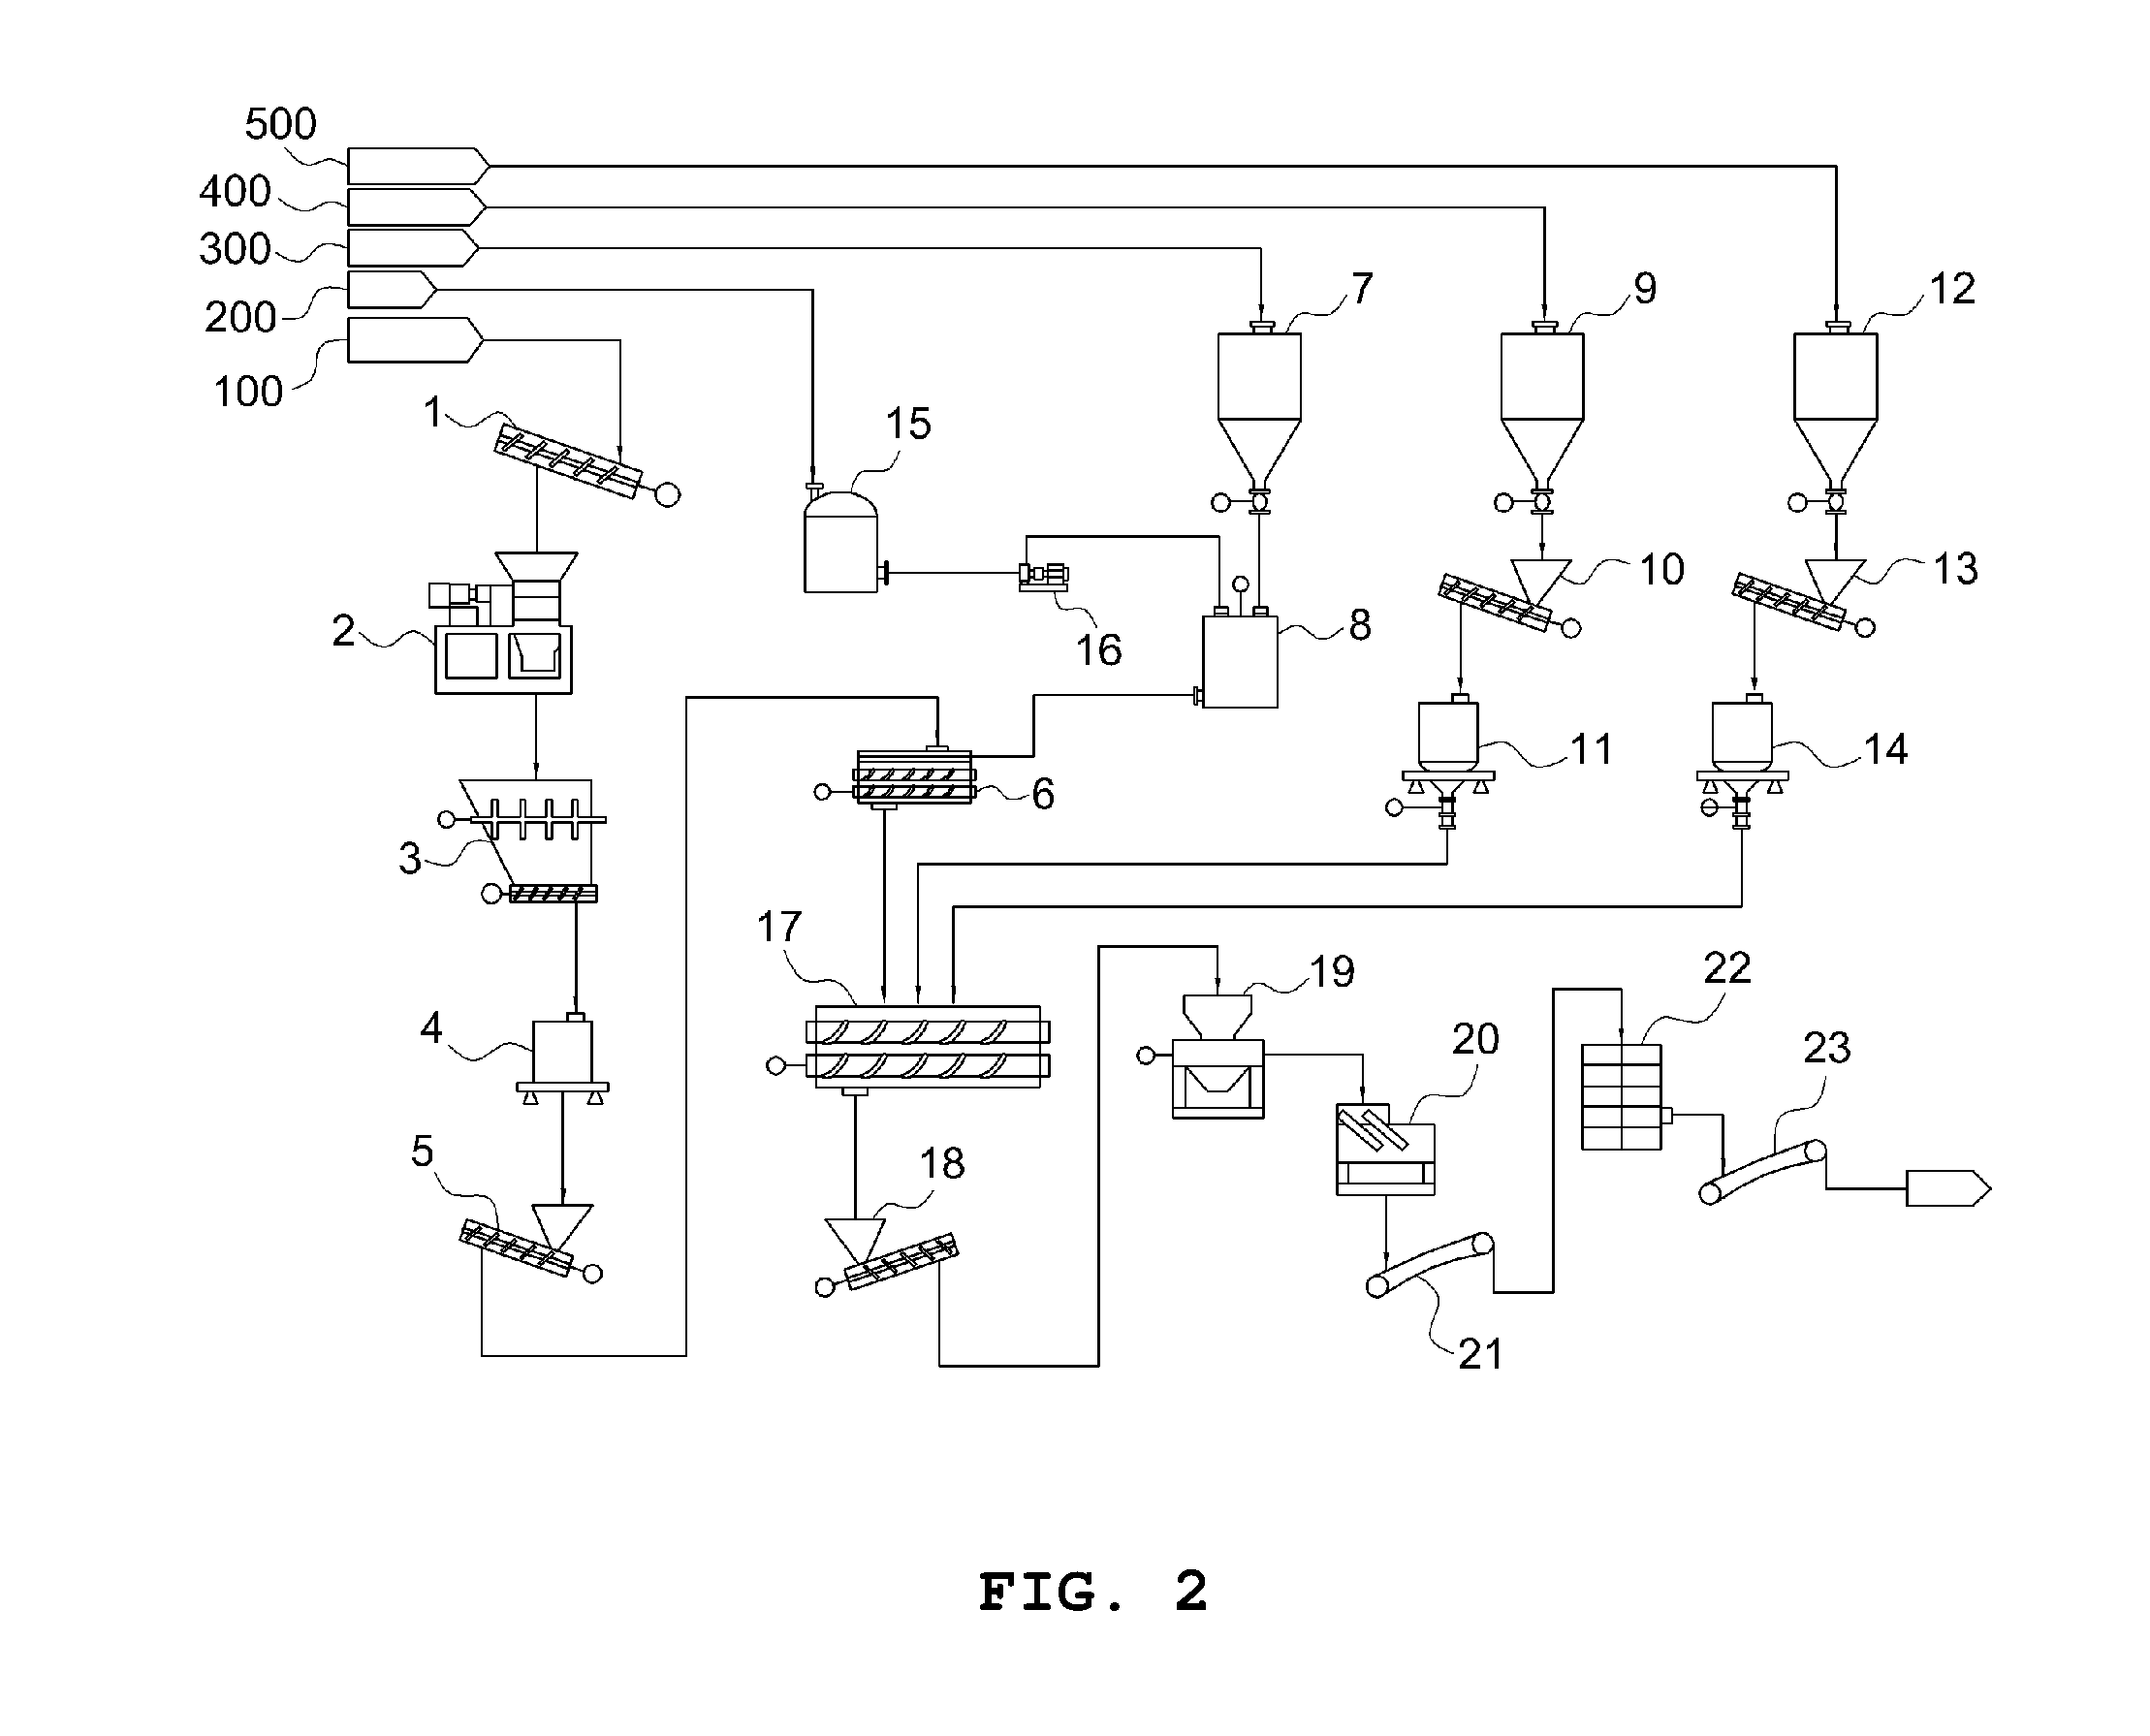 Equipment and method for producing fiber feed by using palm-processing by-products